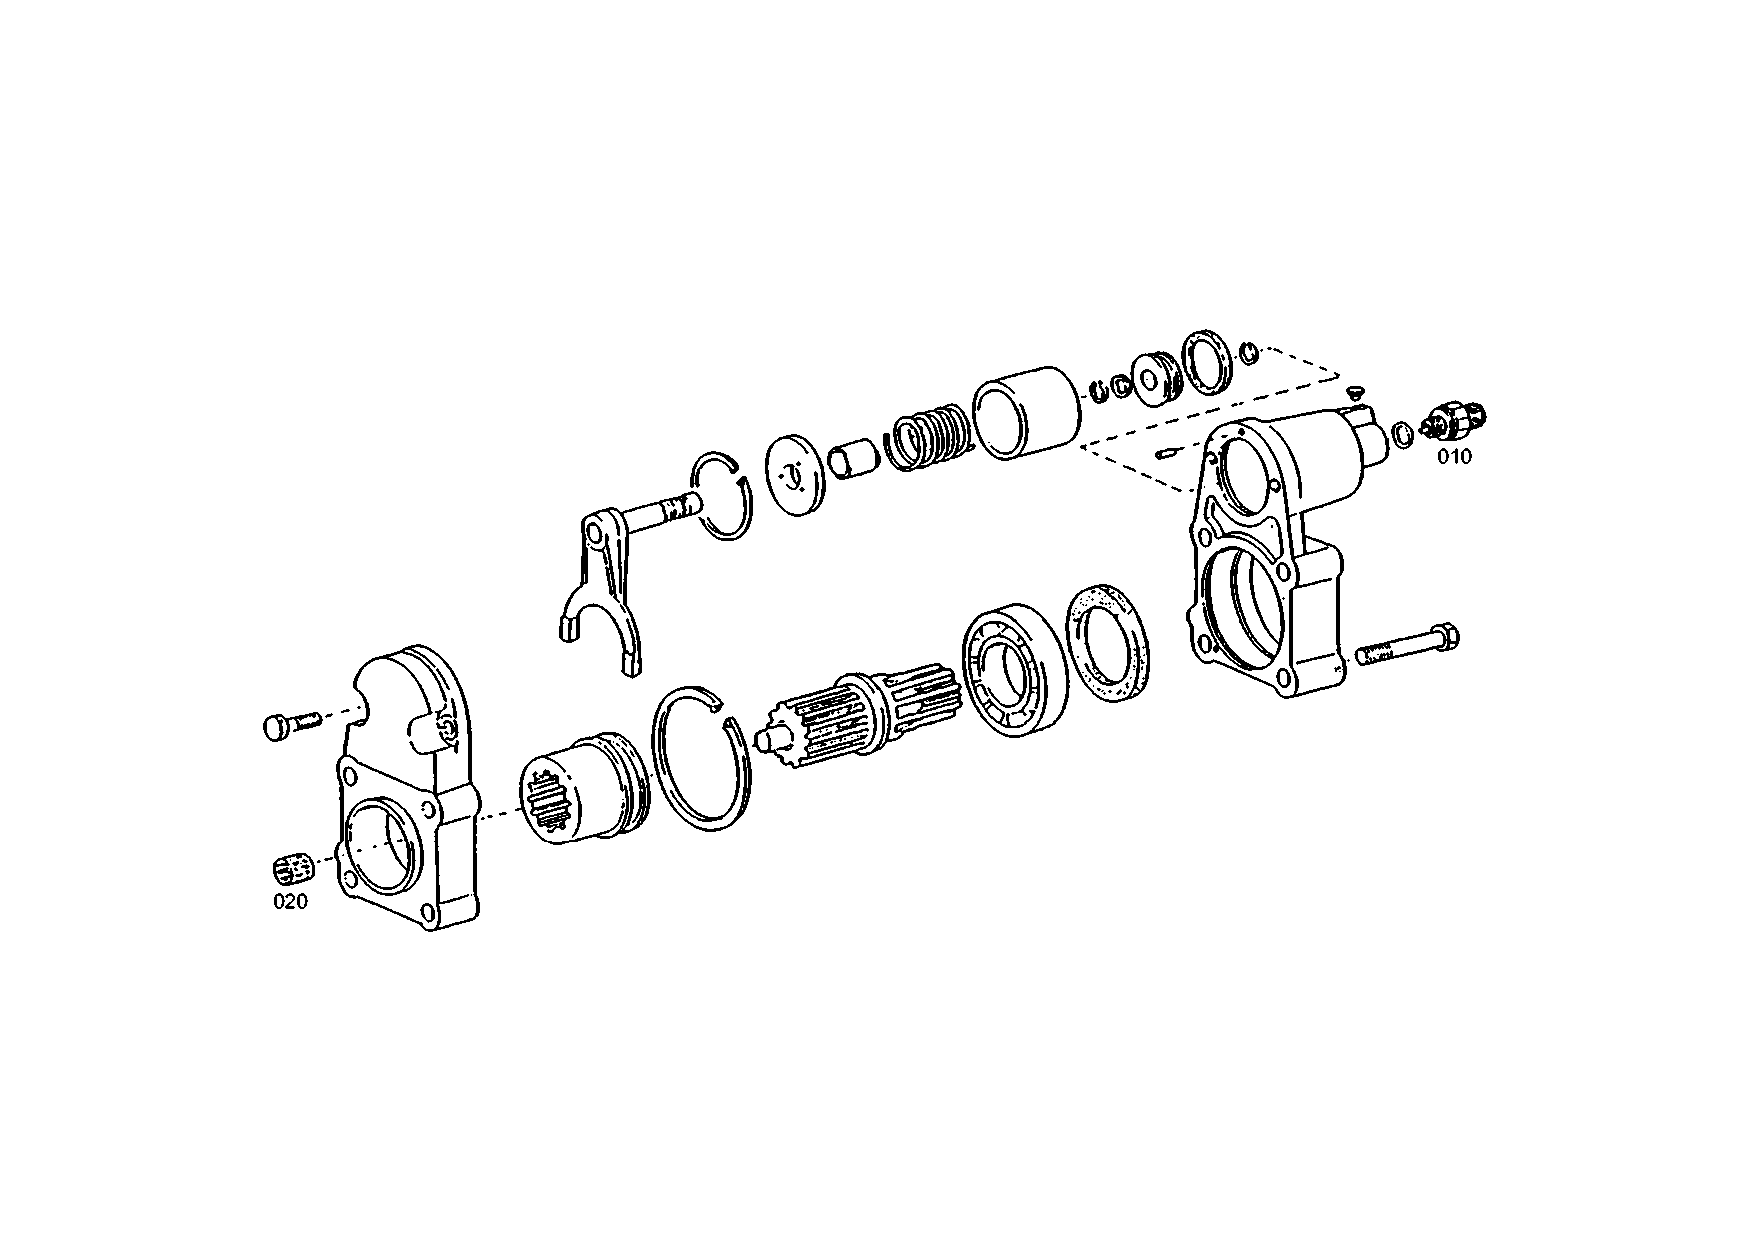 drawing for MARMON Herring MVG751127 - PRESSURE SWITCH (figure 1)